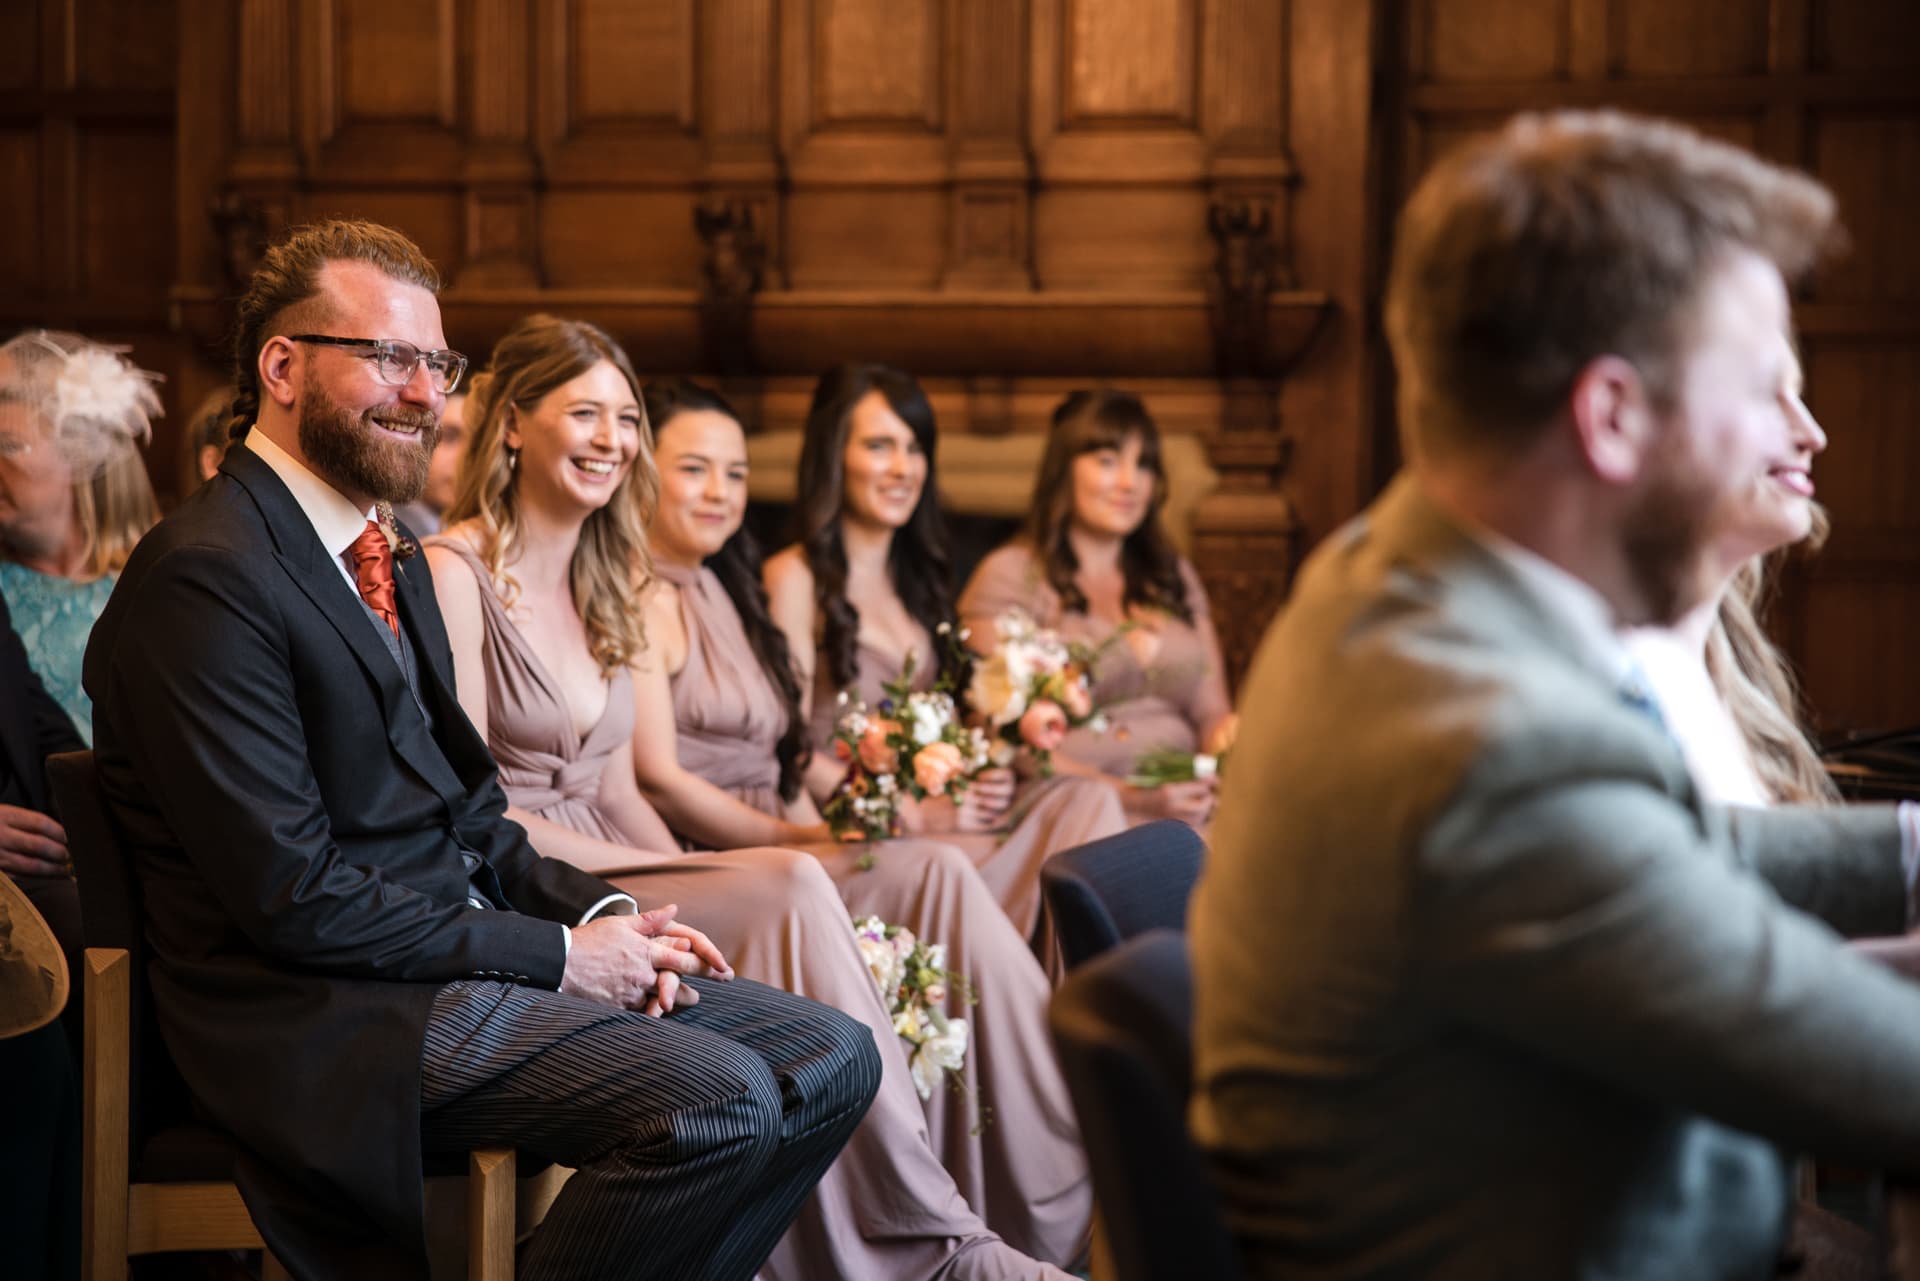 Brides best friend and Bridesmaids looking on during wedding ceremony at Oxford County Hall